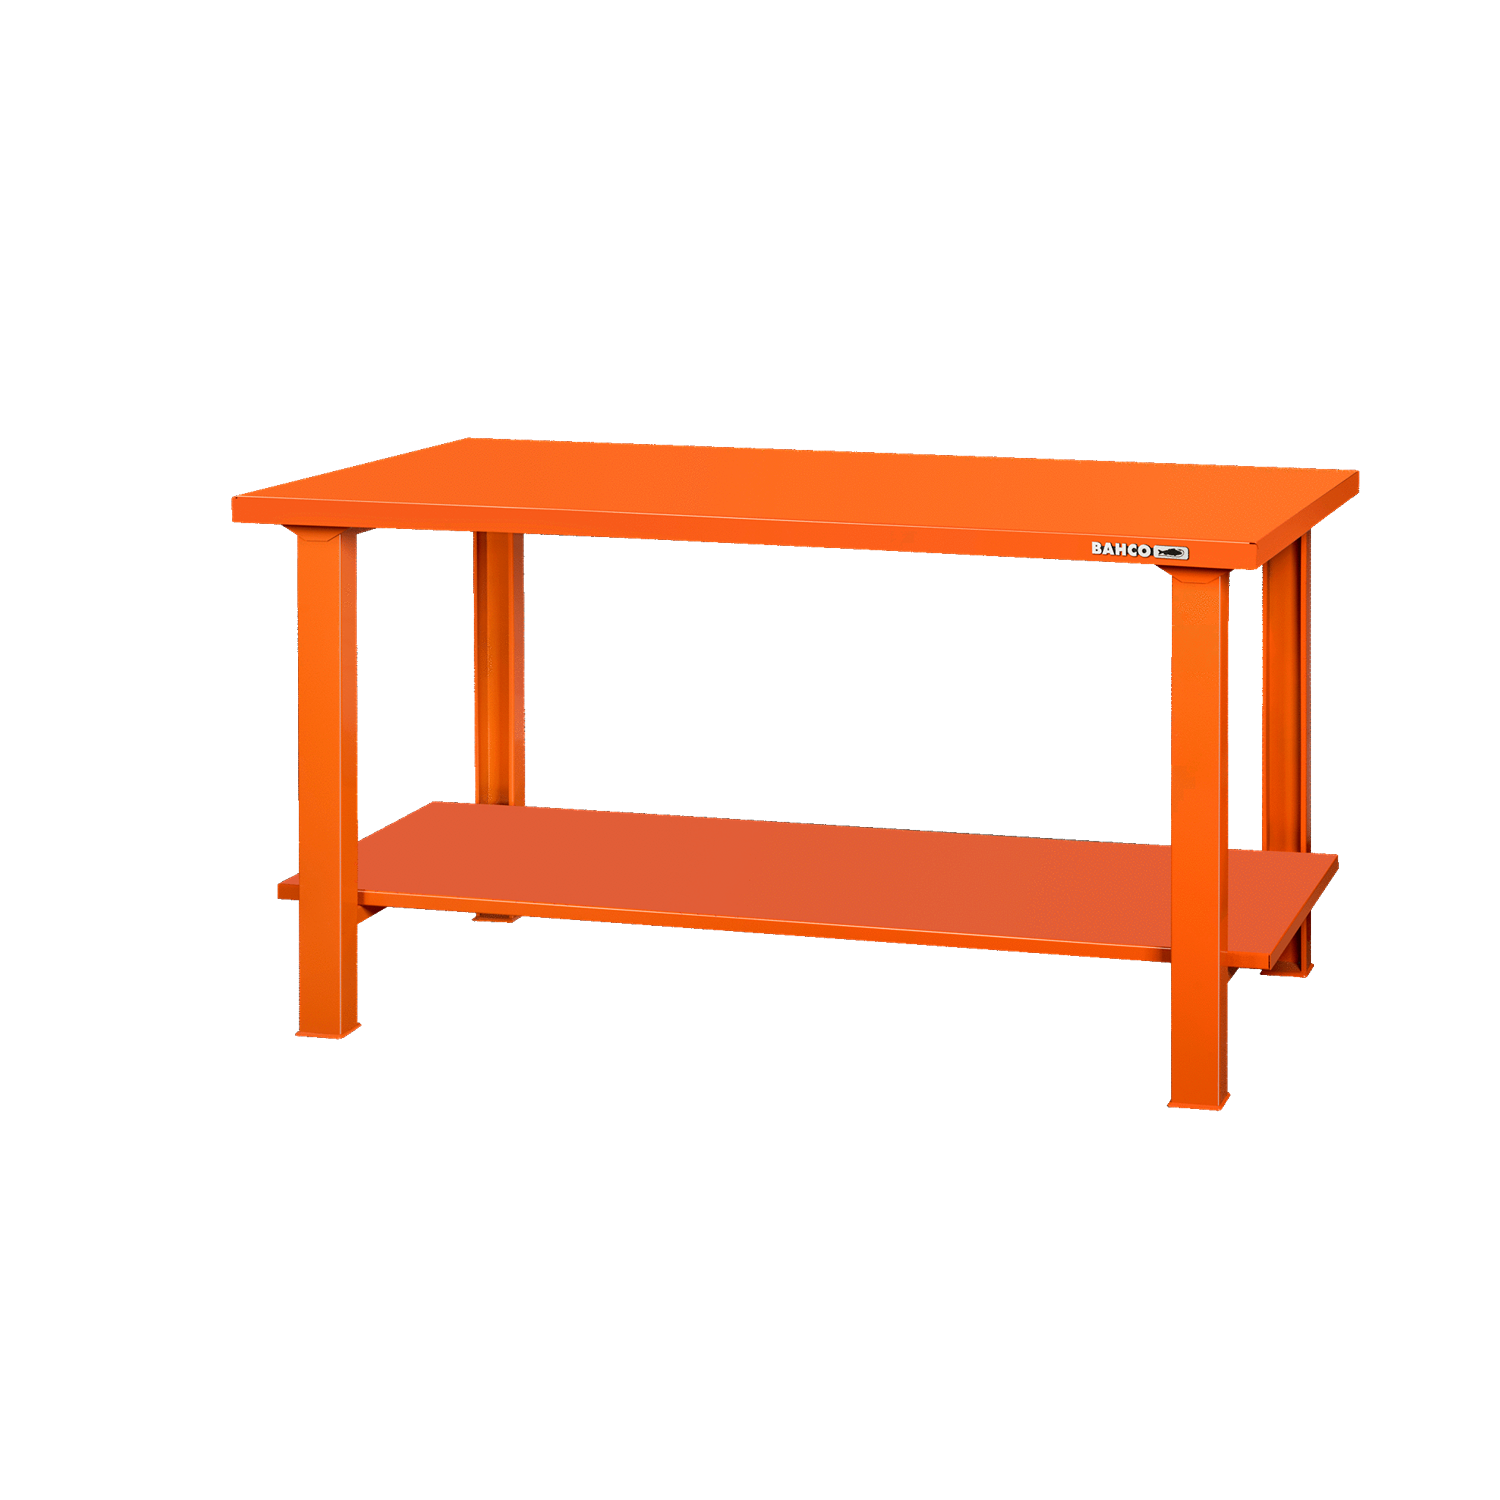 BAHCO 1495WB18TSBT Heavy Duty Steel Top Workbenches & Bottom Tray - Premium Steel Top Workbenches from BAHCO - Shop now at Yew Aik.